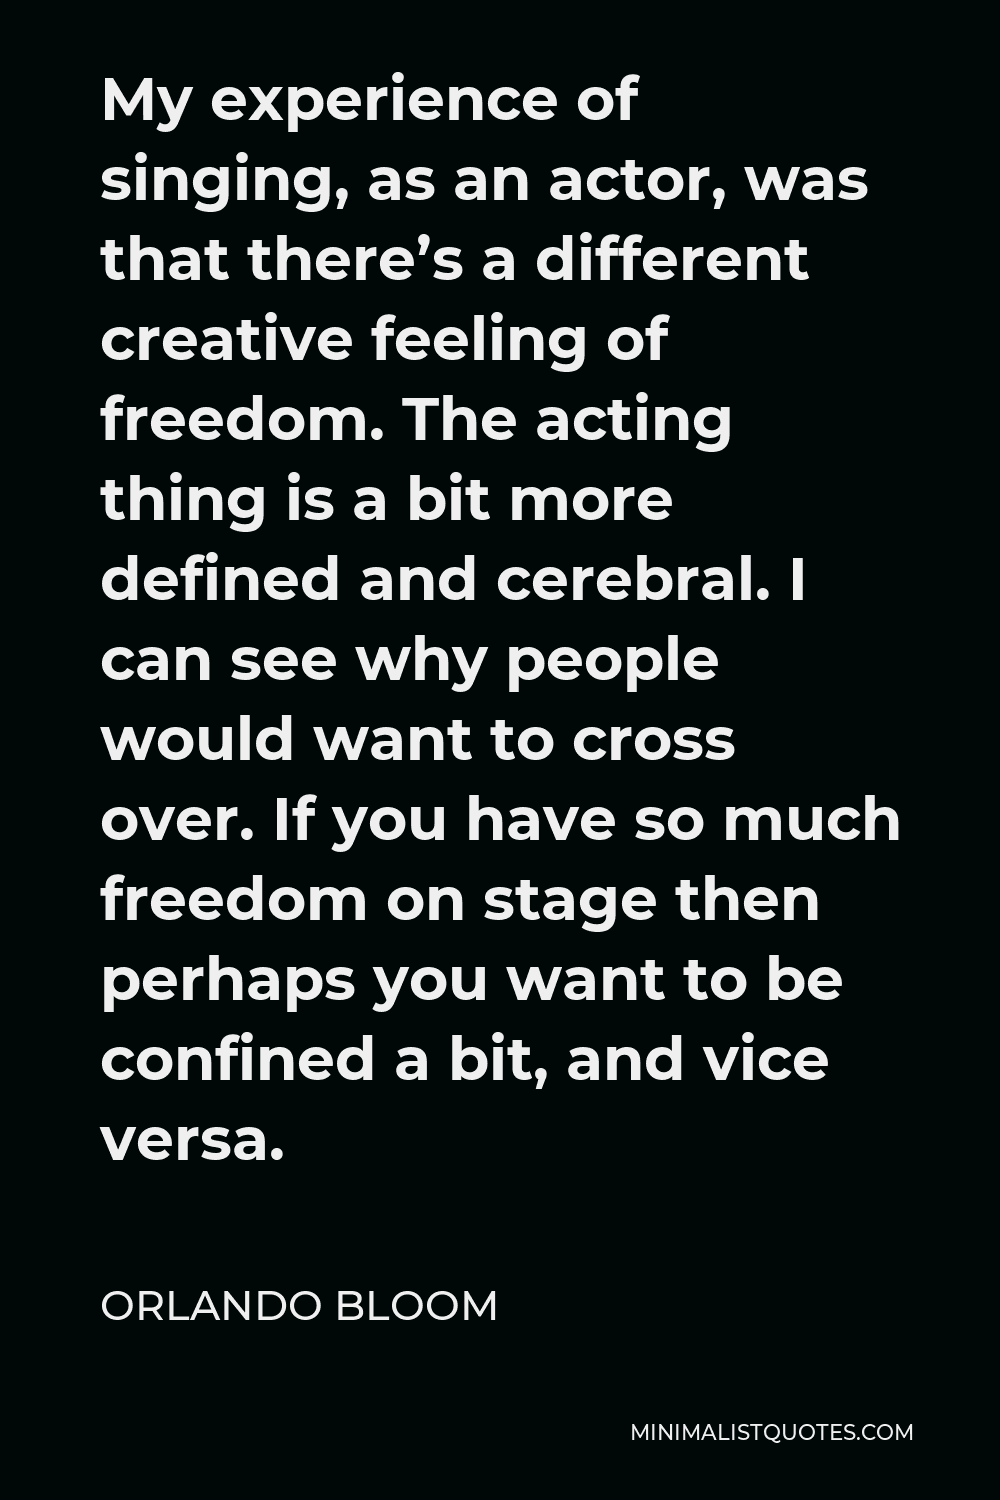 Orlando Bloom Quote - My experience of singing, as an actor, was that there’s a different creative feeling of freedom. The acting thing is a bit more defined and cerebral. I can see why people would want to cross over. If you have so much freedom on stage then perhaps you want to be confined a bit, and vice versa.